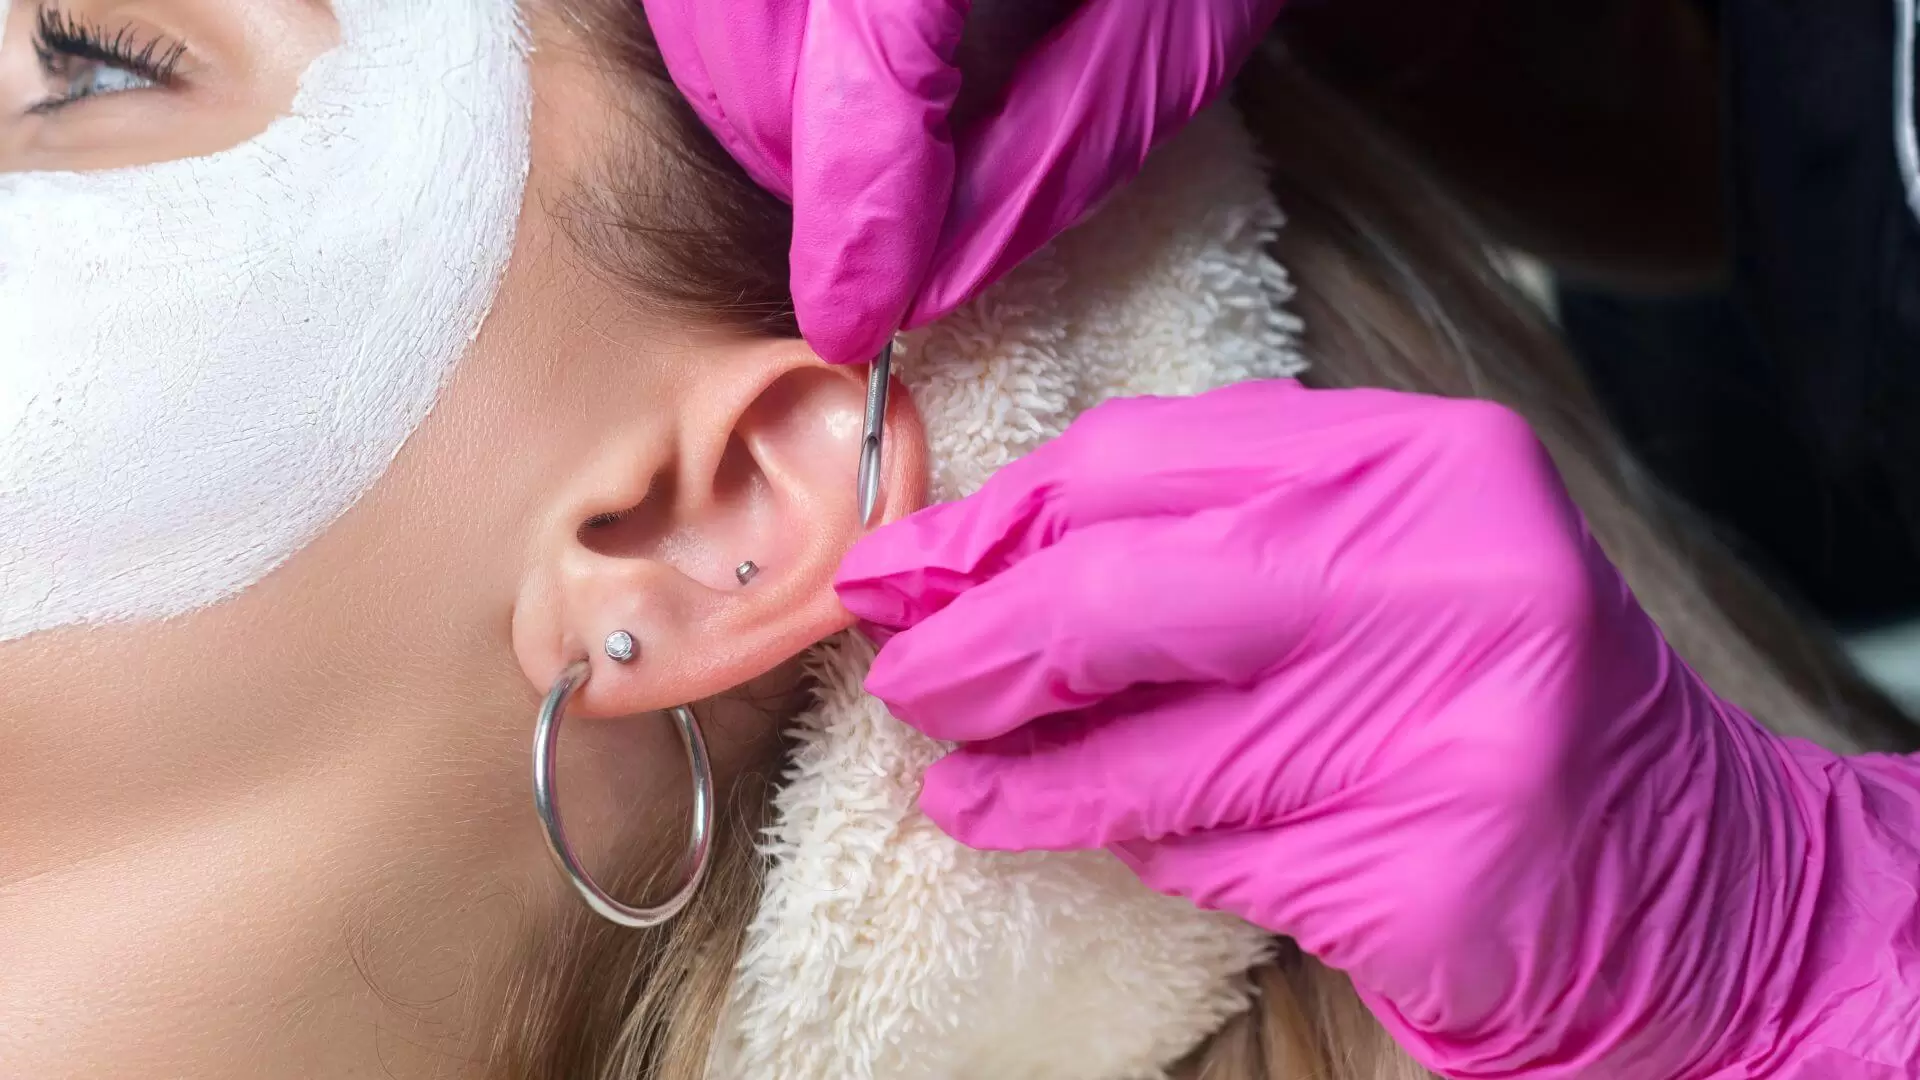 Helix piercing types of ear cartilage punctures, healing, and other nuances (1)